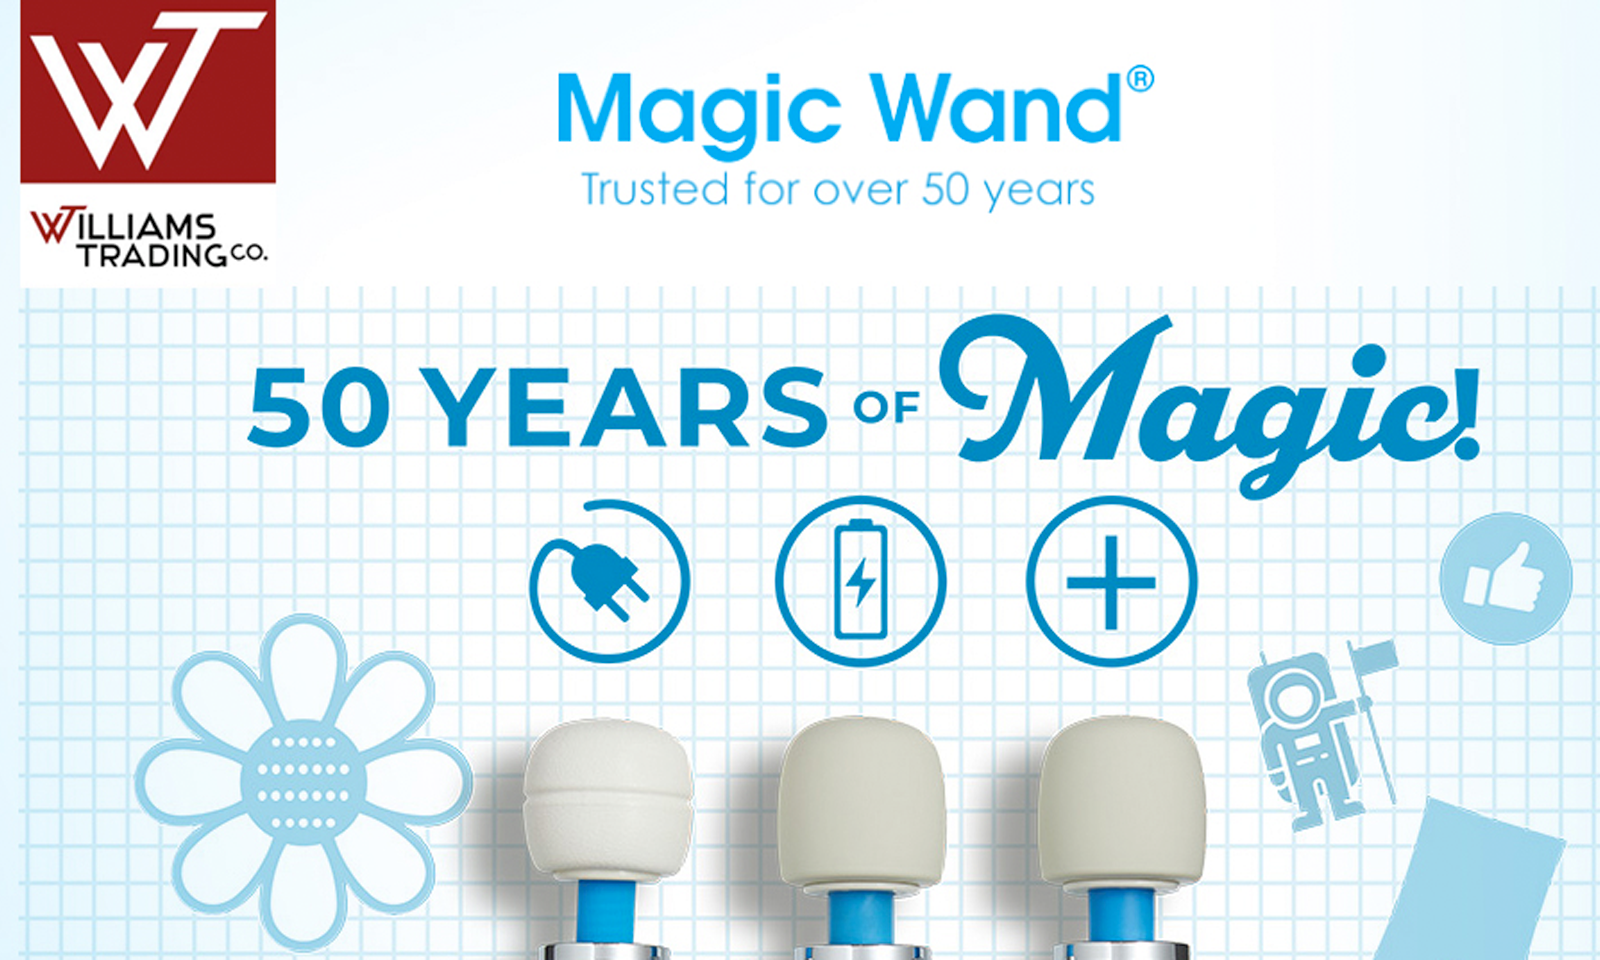 Magic Wand Products Now Available at Williams Trading Co.